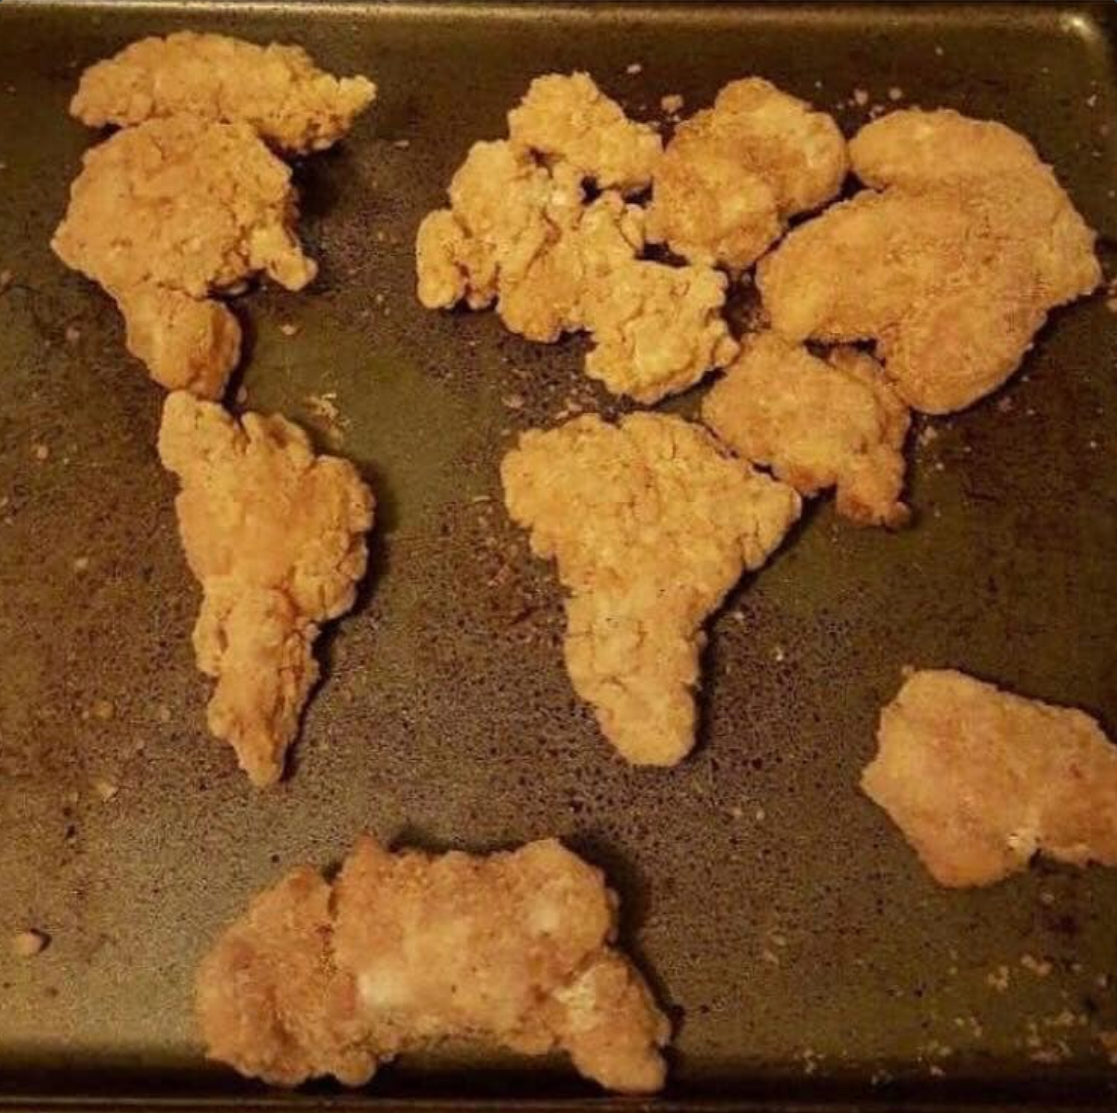 terrible map jokes - chicken nuggets world map